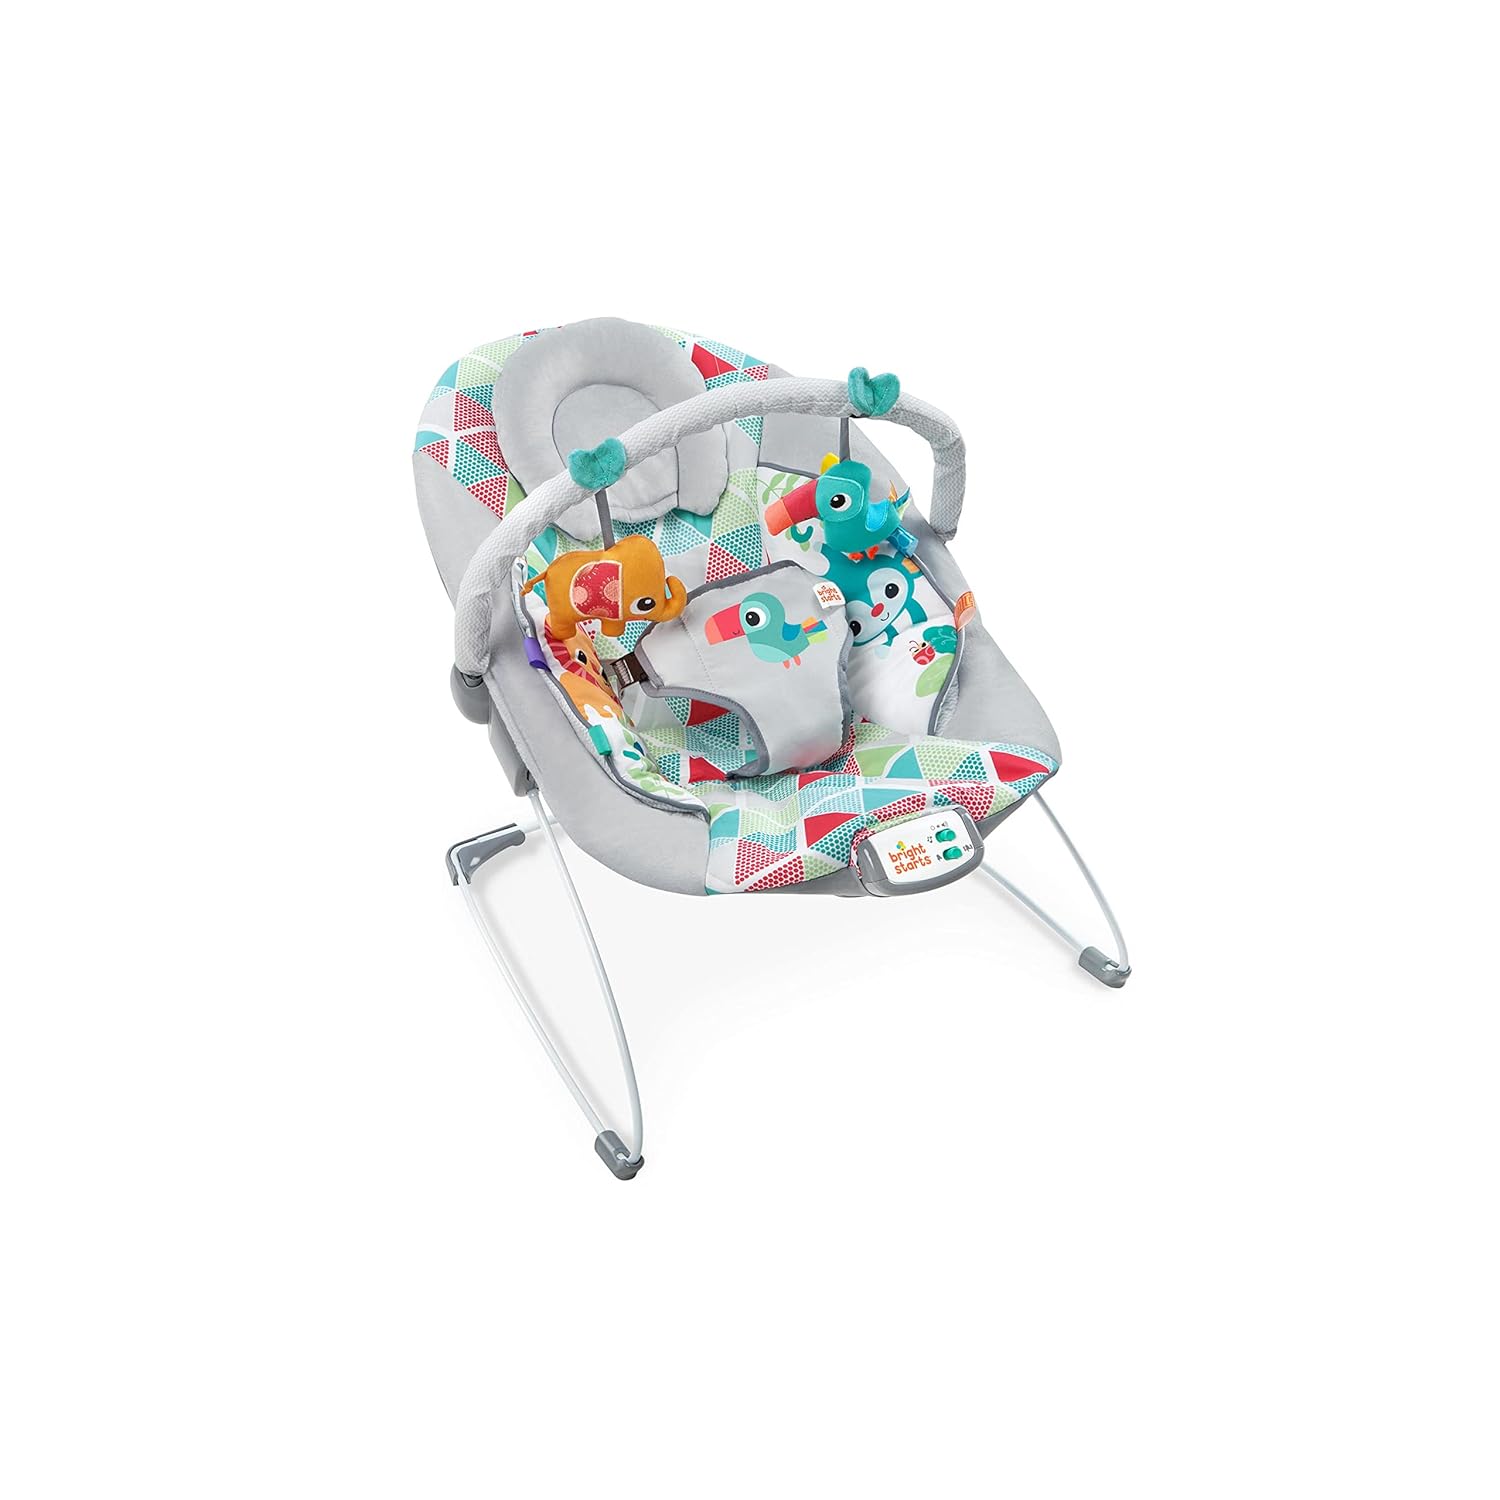 Bright Starts Baby Bouncer Soothing Vibrations Infant Seat, Toucan Tango